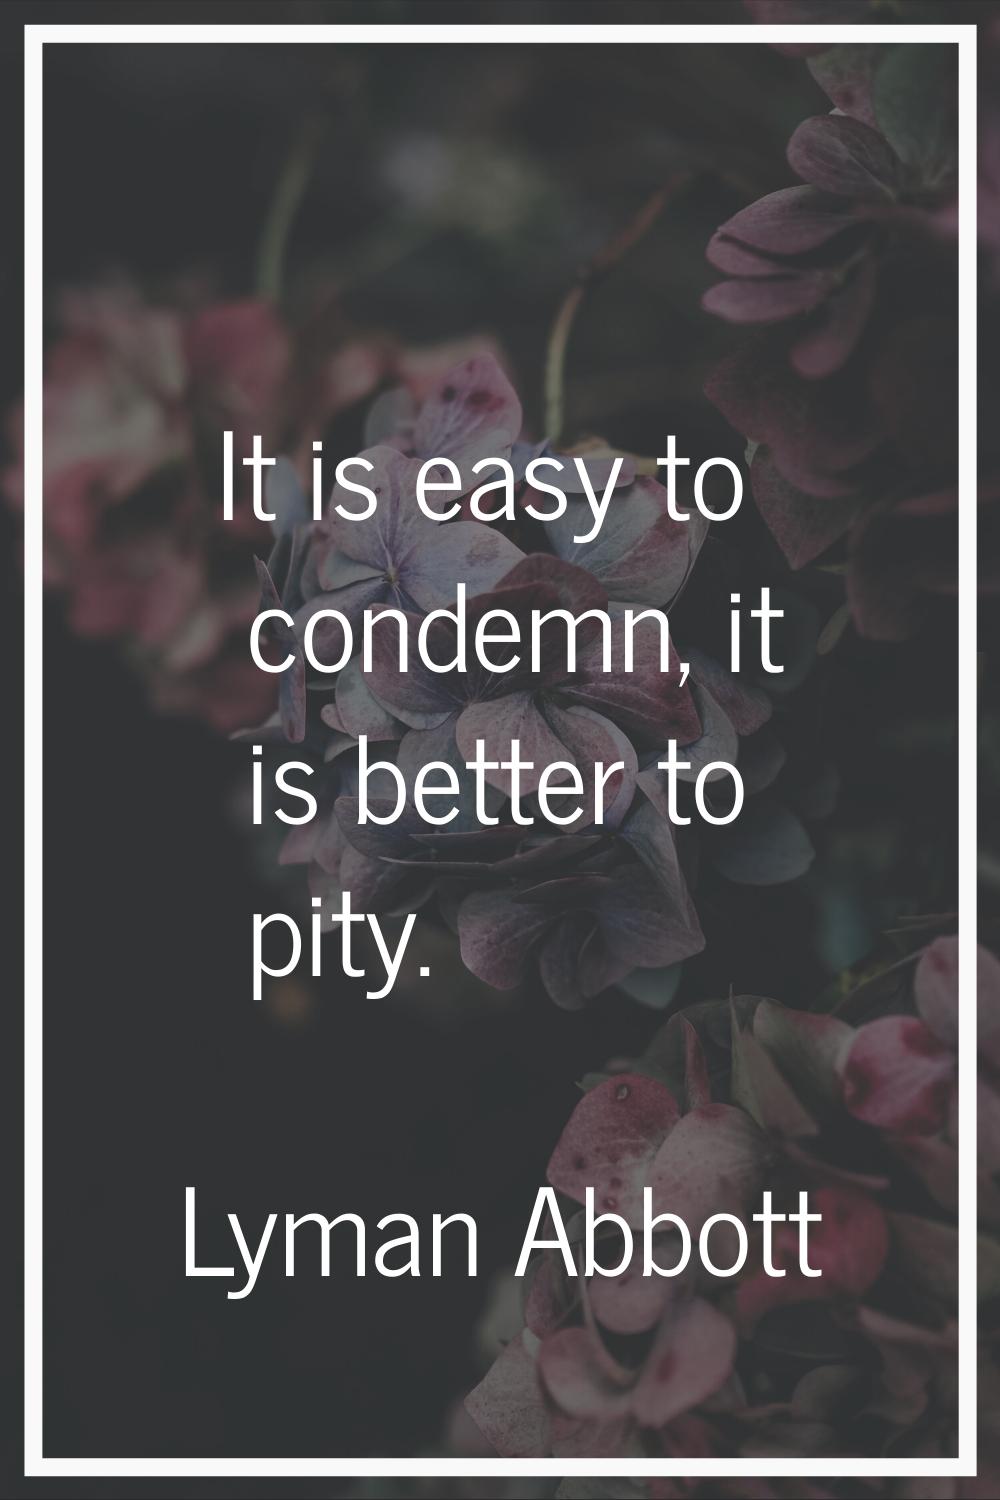 It is easy to condemn, it is better to pity.